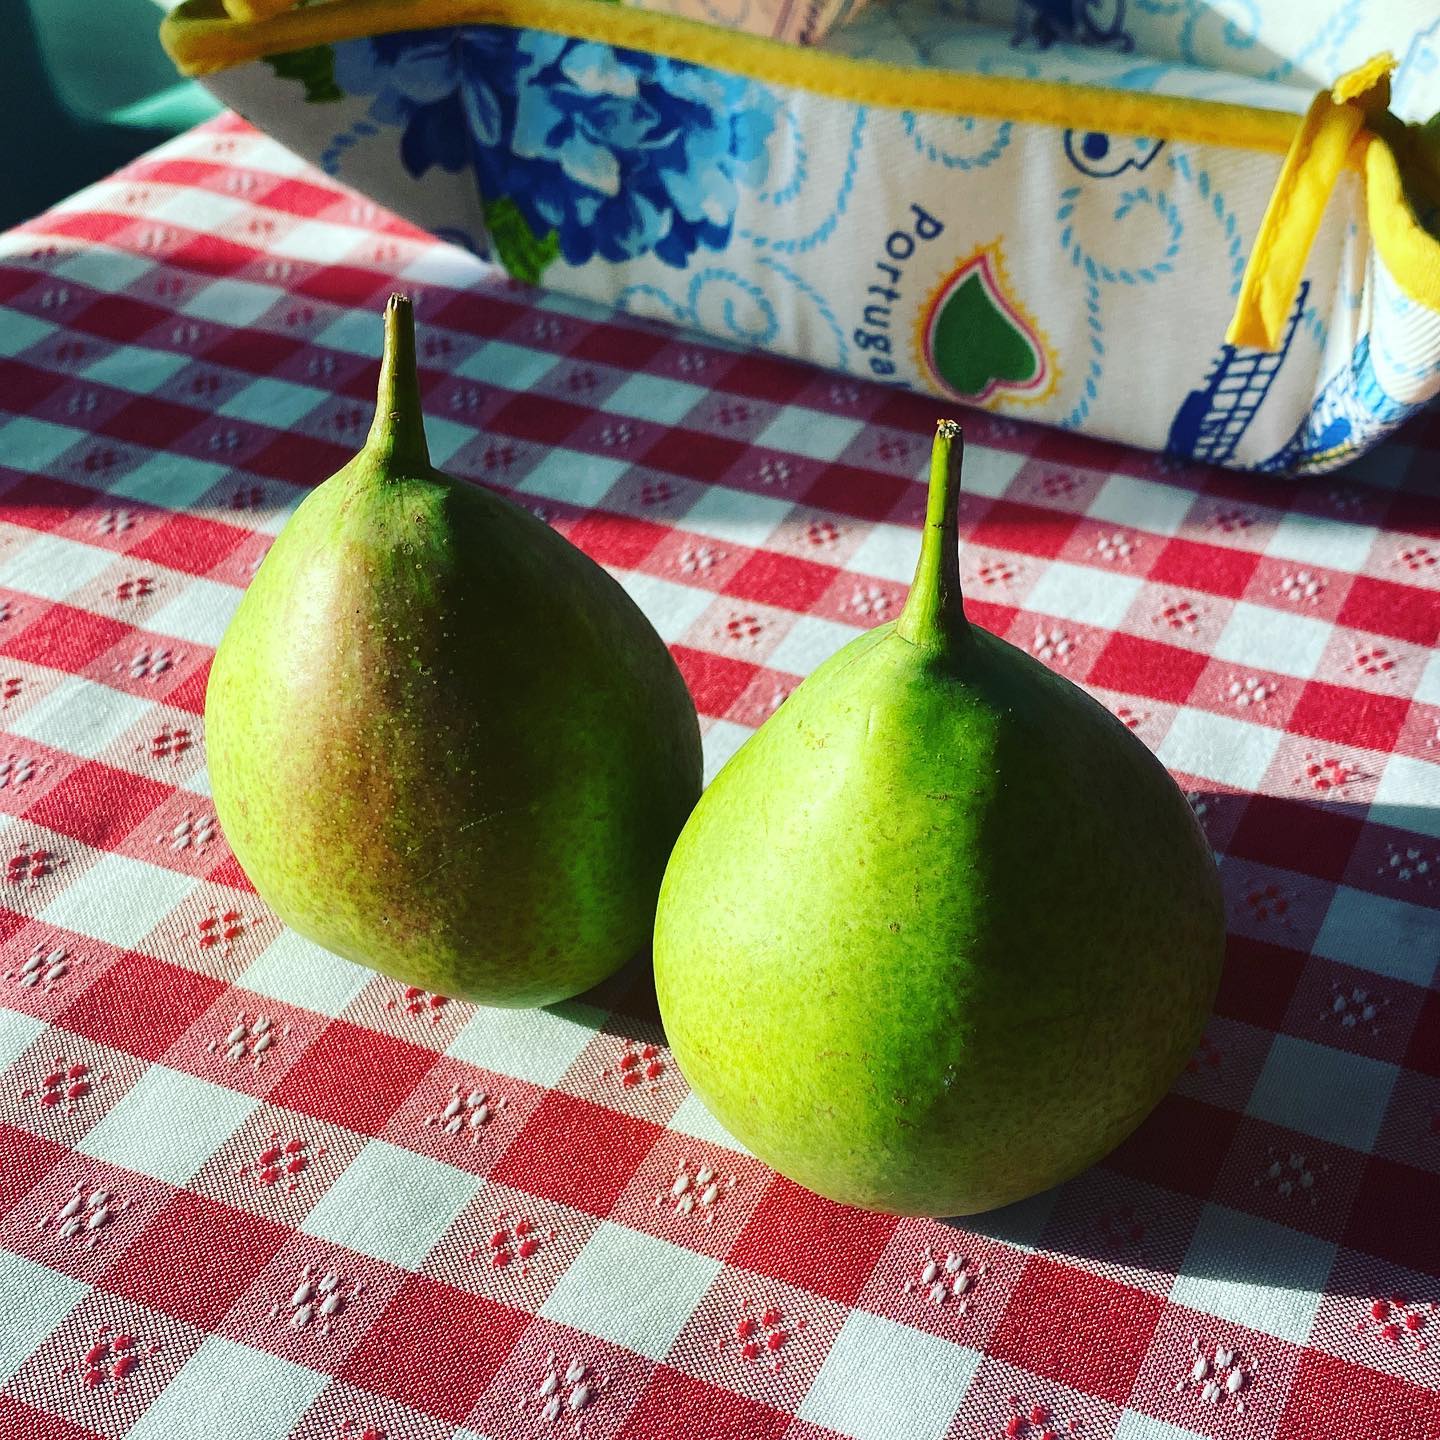 I got two pears 🍐 from my orchard, they coming out gorgeous!!